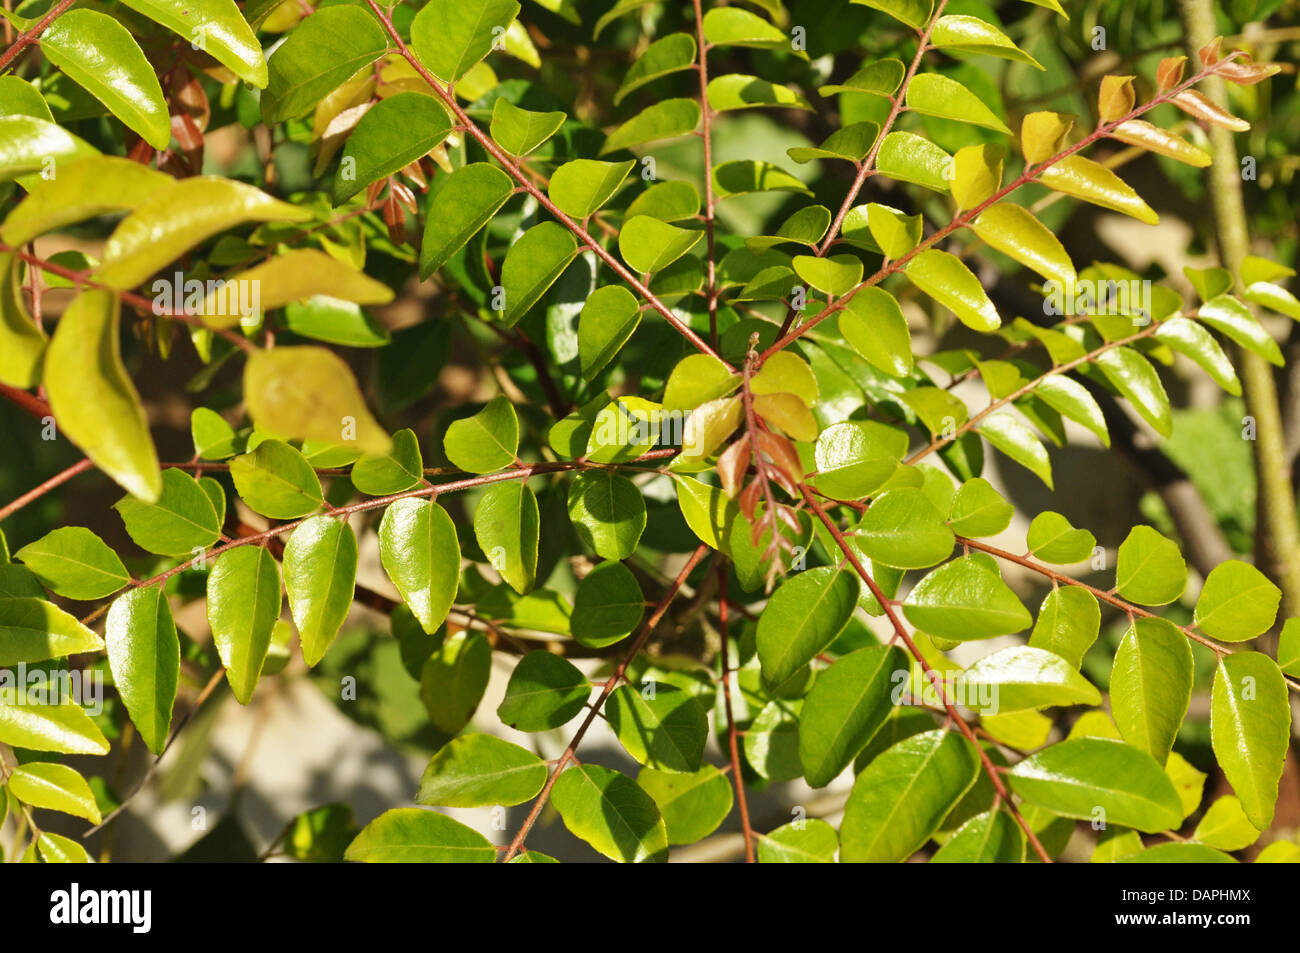 Curry leaves Stock Photo